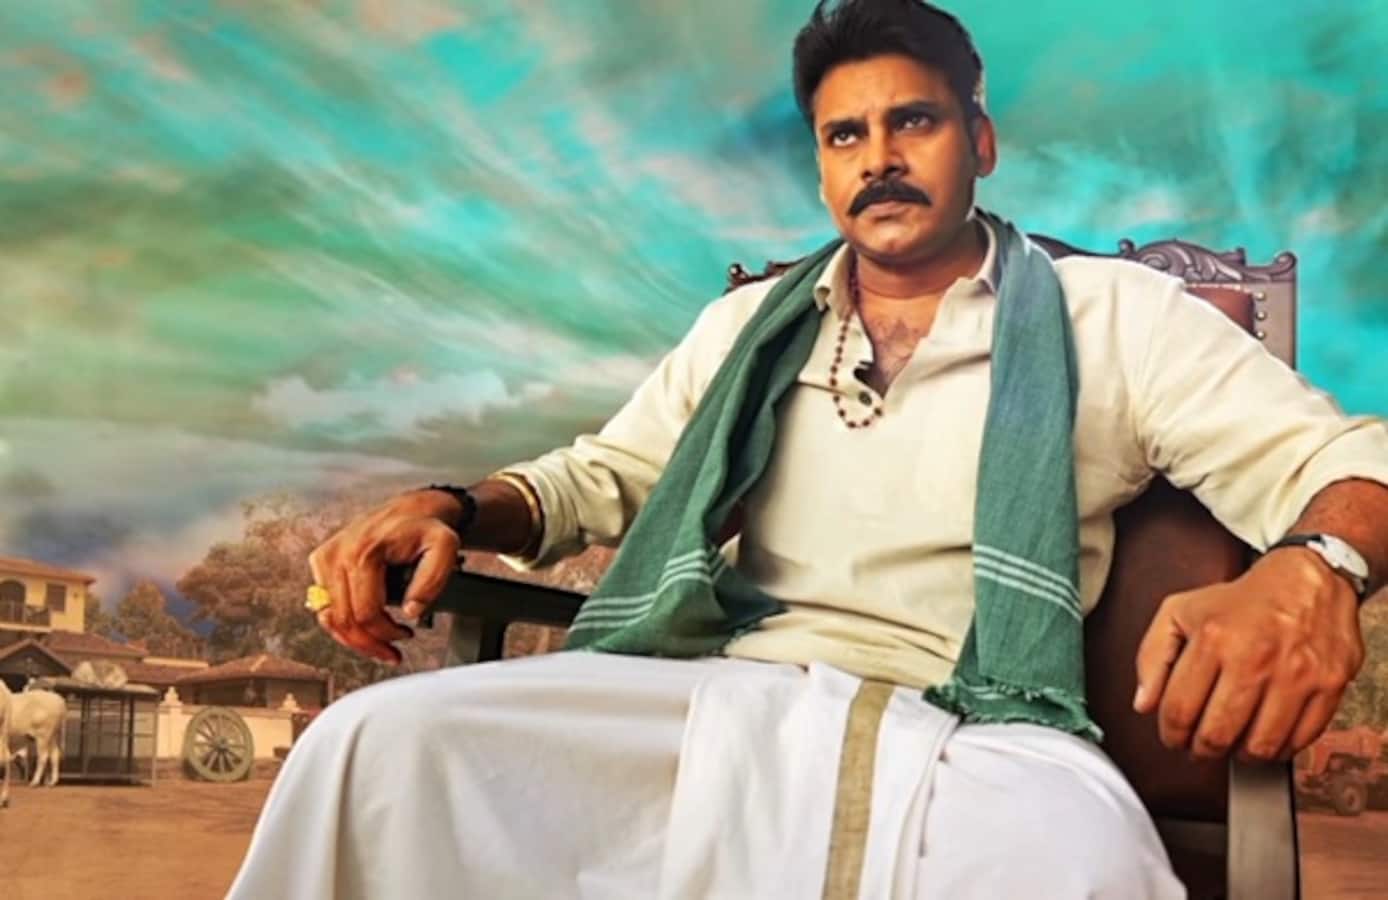 Pawan Kalyan Ready To Quit Acting For Politics Bollywood News And Gossip Movie Reviews